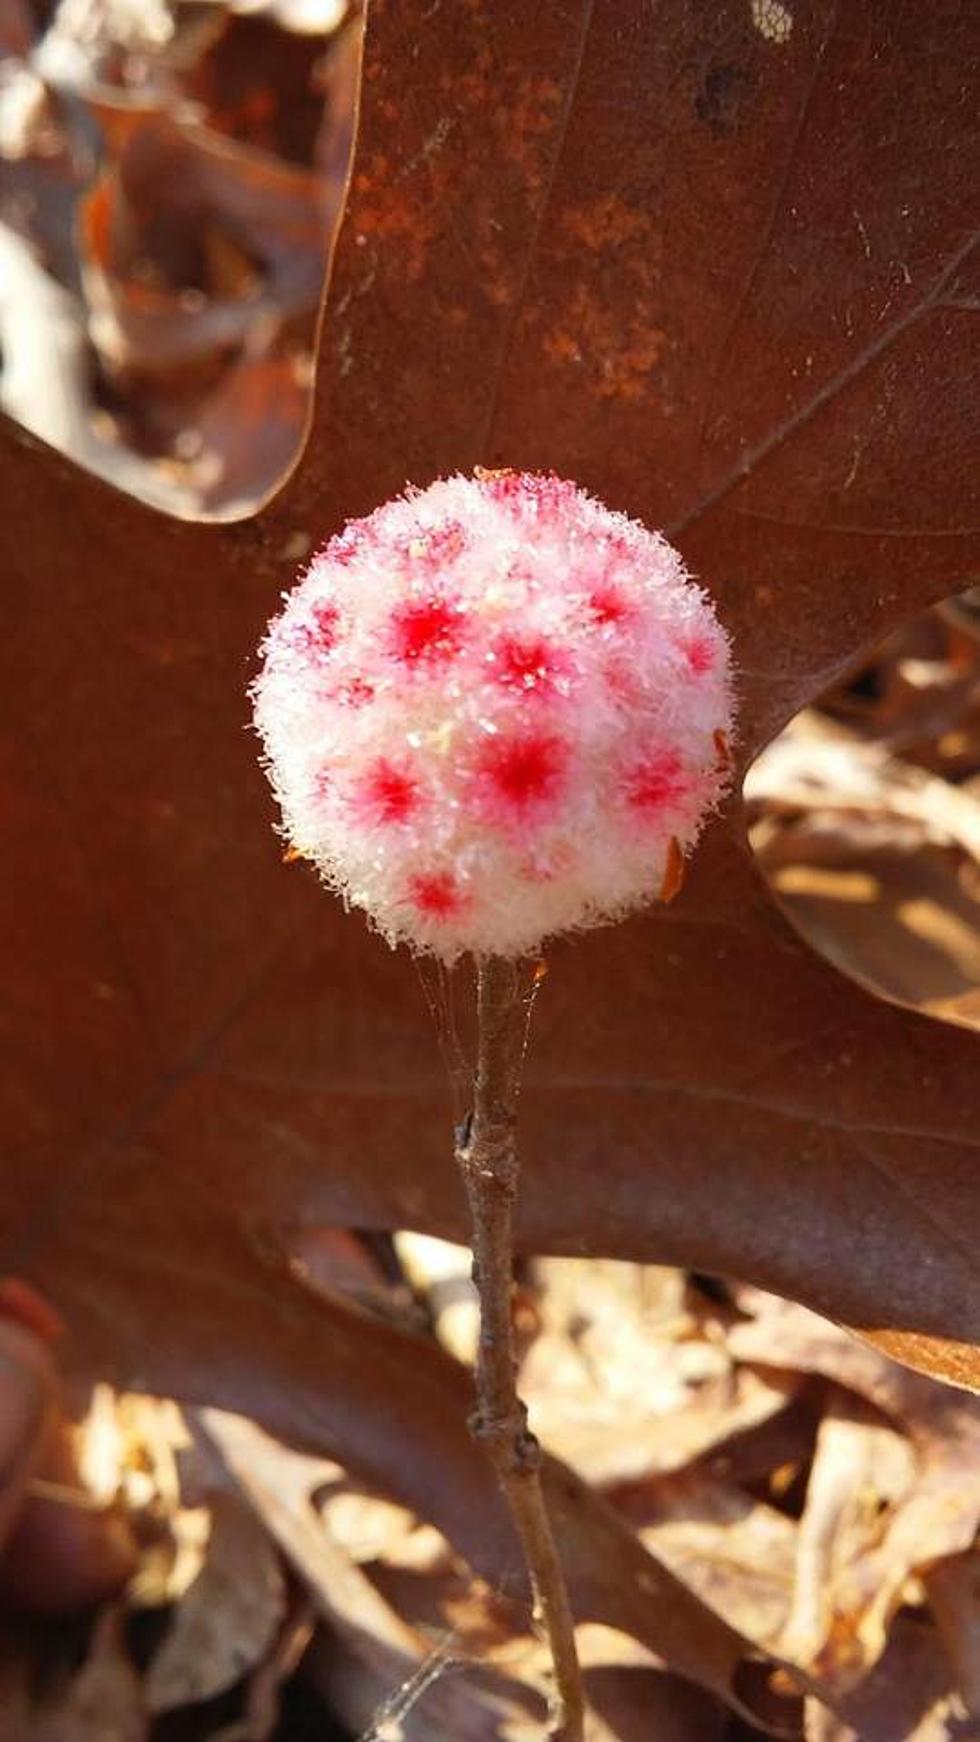 Texas Parks & Wildlife Shares Dr. Seuss-Looking Plant – or What’s Known as a Wool Sower Gall